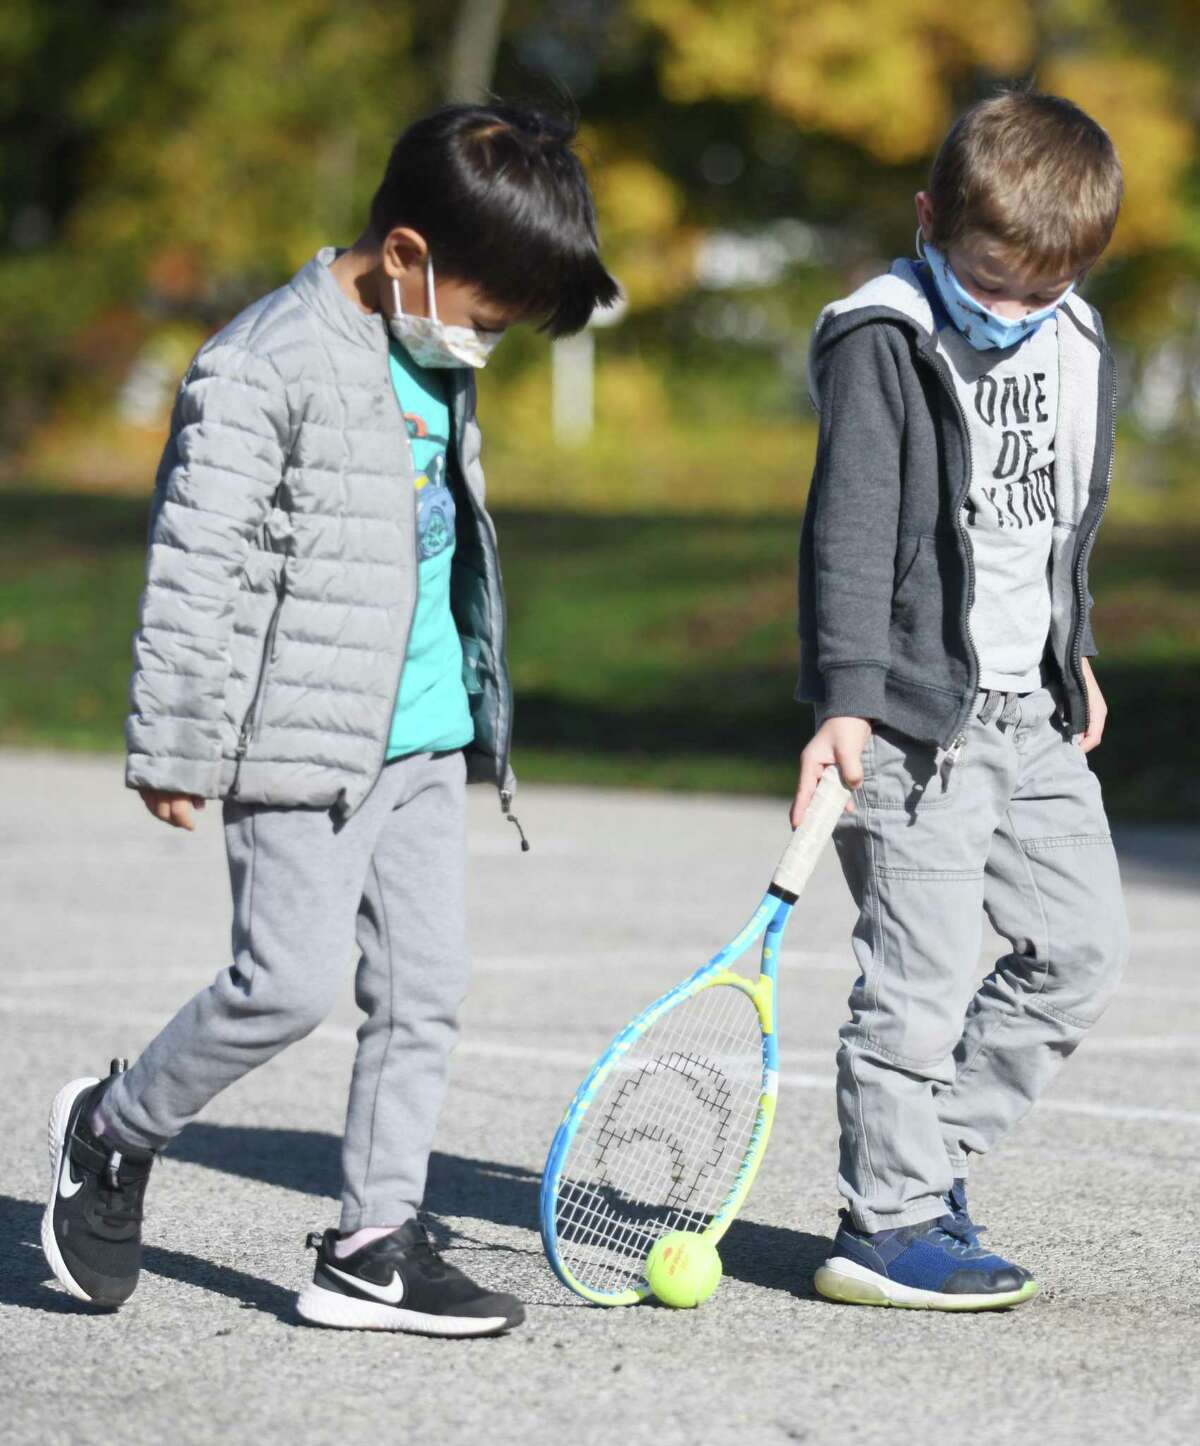 Kindergartners Sean Song, left, and Andrew Lofaro do a "walk the dog" drill during former tennis pro Eric Butorac's class for students at Cos Cob School in the Cos Cob section of Greenwich, Conn. Thursday, Nov. 4, 2021. The former tennis doubles specialist lives in Cos Cob and his children attend school in Greenwich, so he took a day to teach tennis to kids during gym class at Cos Cob School. The students learned the basics of tennis and completed drills individually and in small groups.